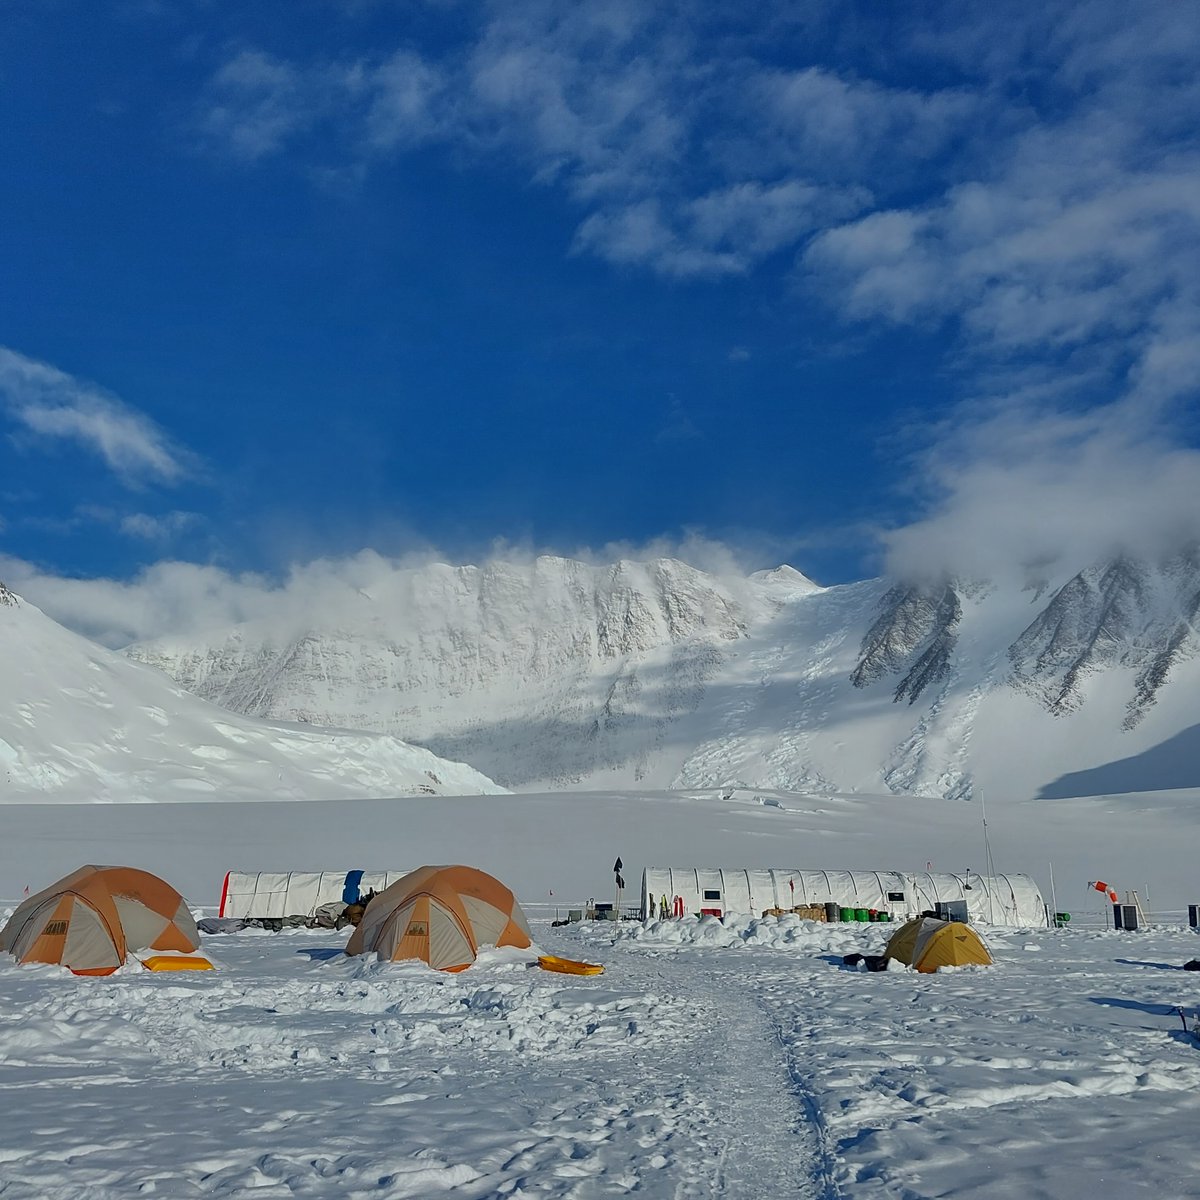 Vinson Base Camp, looking toward Branscomb Ride on Vinson Massif. With one dedicated ALE guide overseeing operations and supported by a team of base camp staff and ALE Rangers, we ensure everything runs smoothly on Vinson Massif. #VinsonBaseCamp #VinsonMassif Photo: Matt Murphy